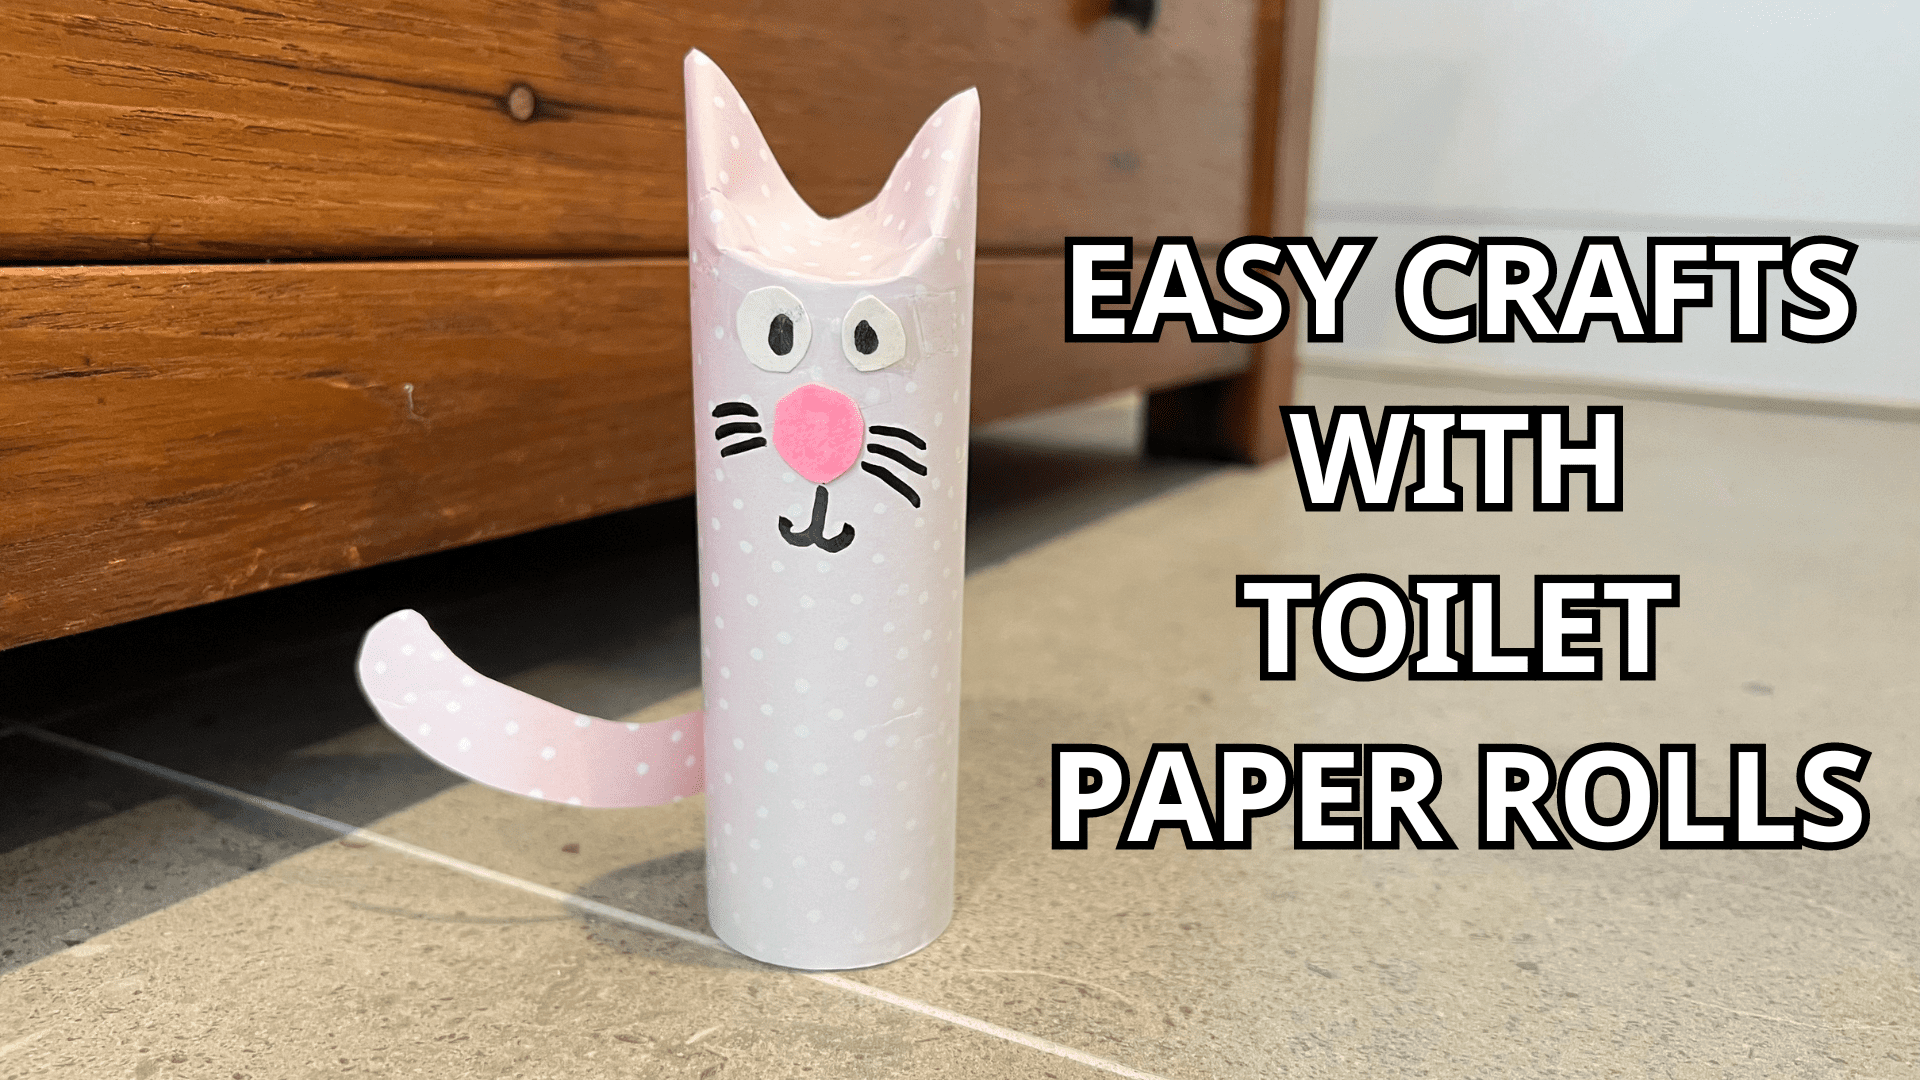 A photo of a smiling light pink kitty cat toilet paper roll. The text says "Easy Crafts with Toilet Paper Rolls". This introduces our easy crafts for kids with toilet paper rolls!